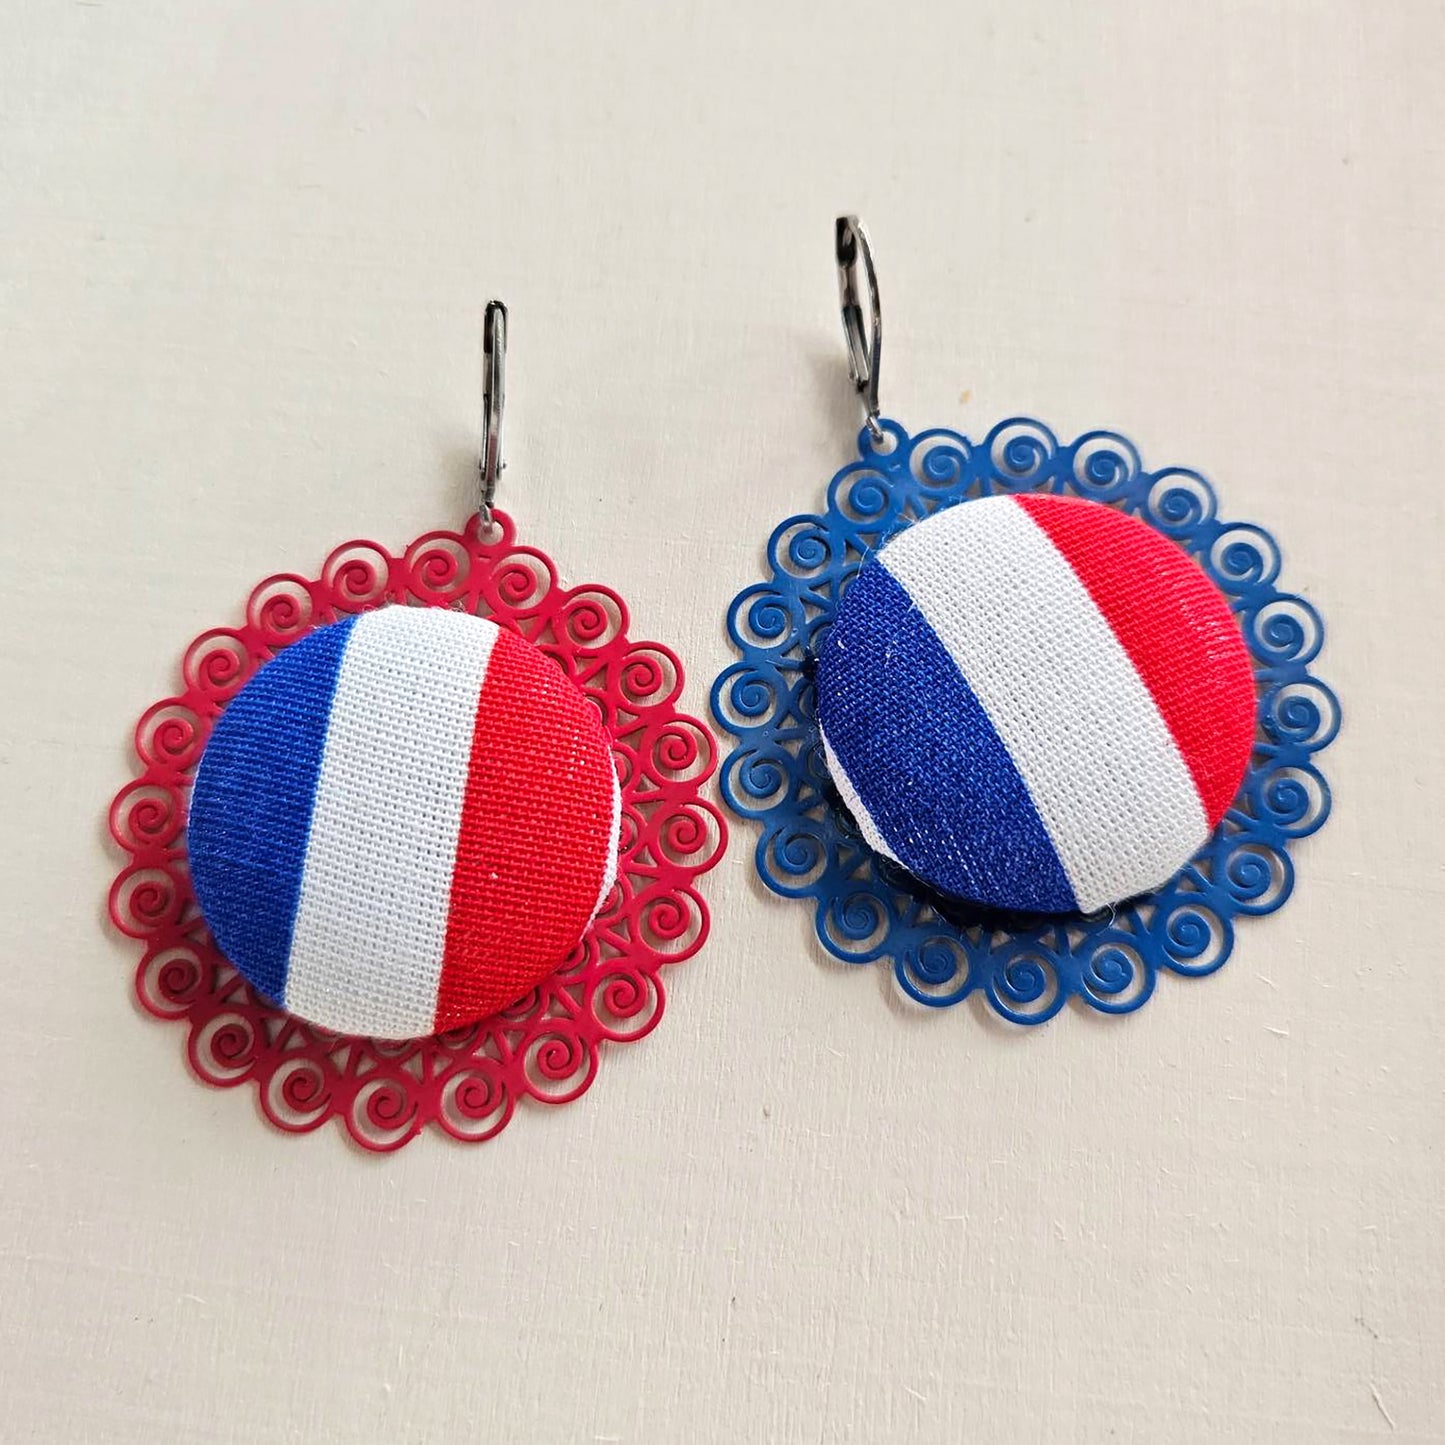 "Wear Your Colors Proudly: French Flag Earrings for Olympic Enthusiasts"